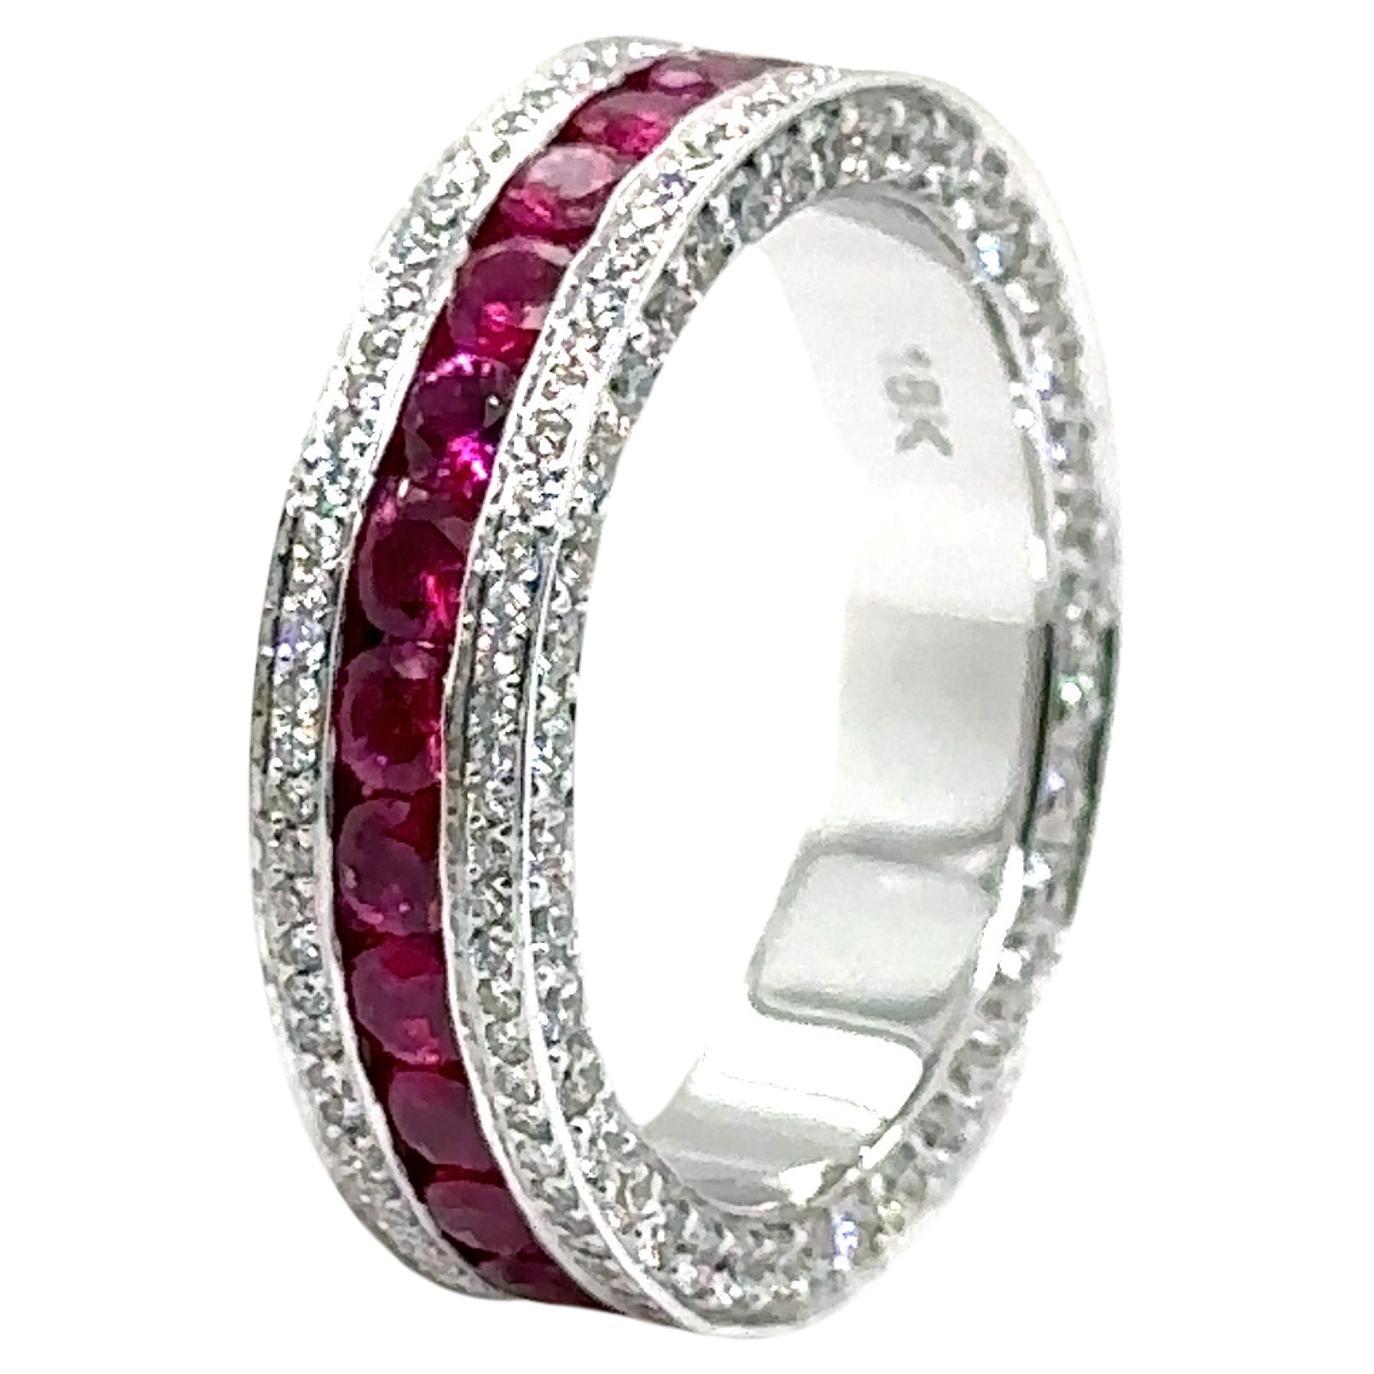 RTR004-RUBY - 18K WHITE GOLD WEDDING BAND With RUBY & DIAMONDS 